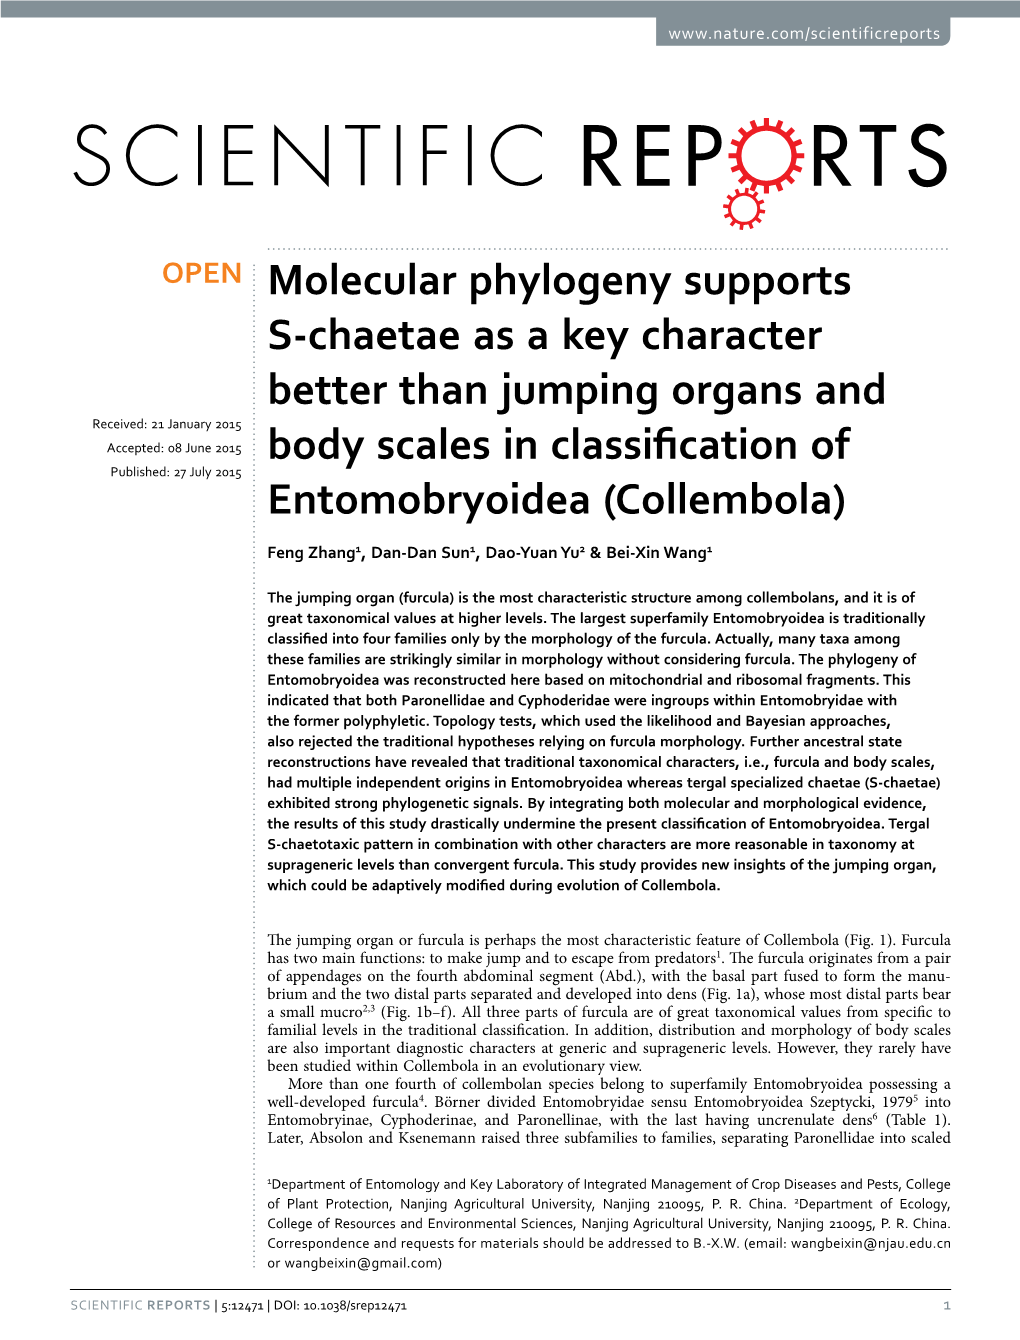 Molecular Phylogeny Supports S-Chaetae As a Key Character Better